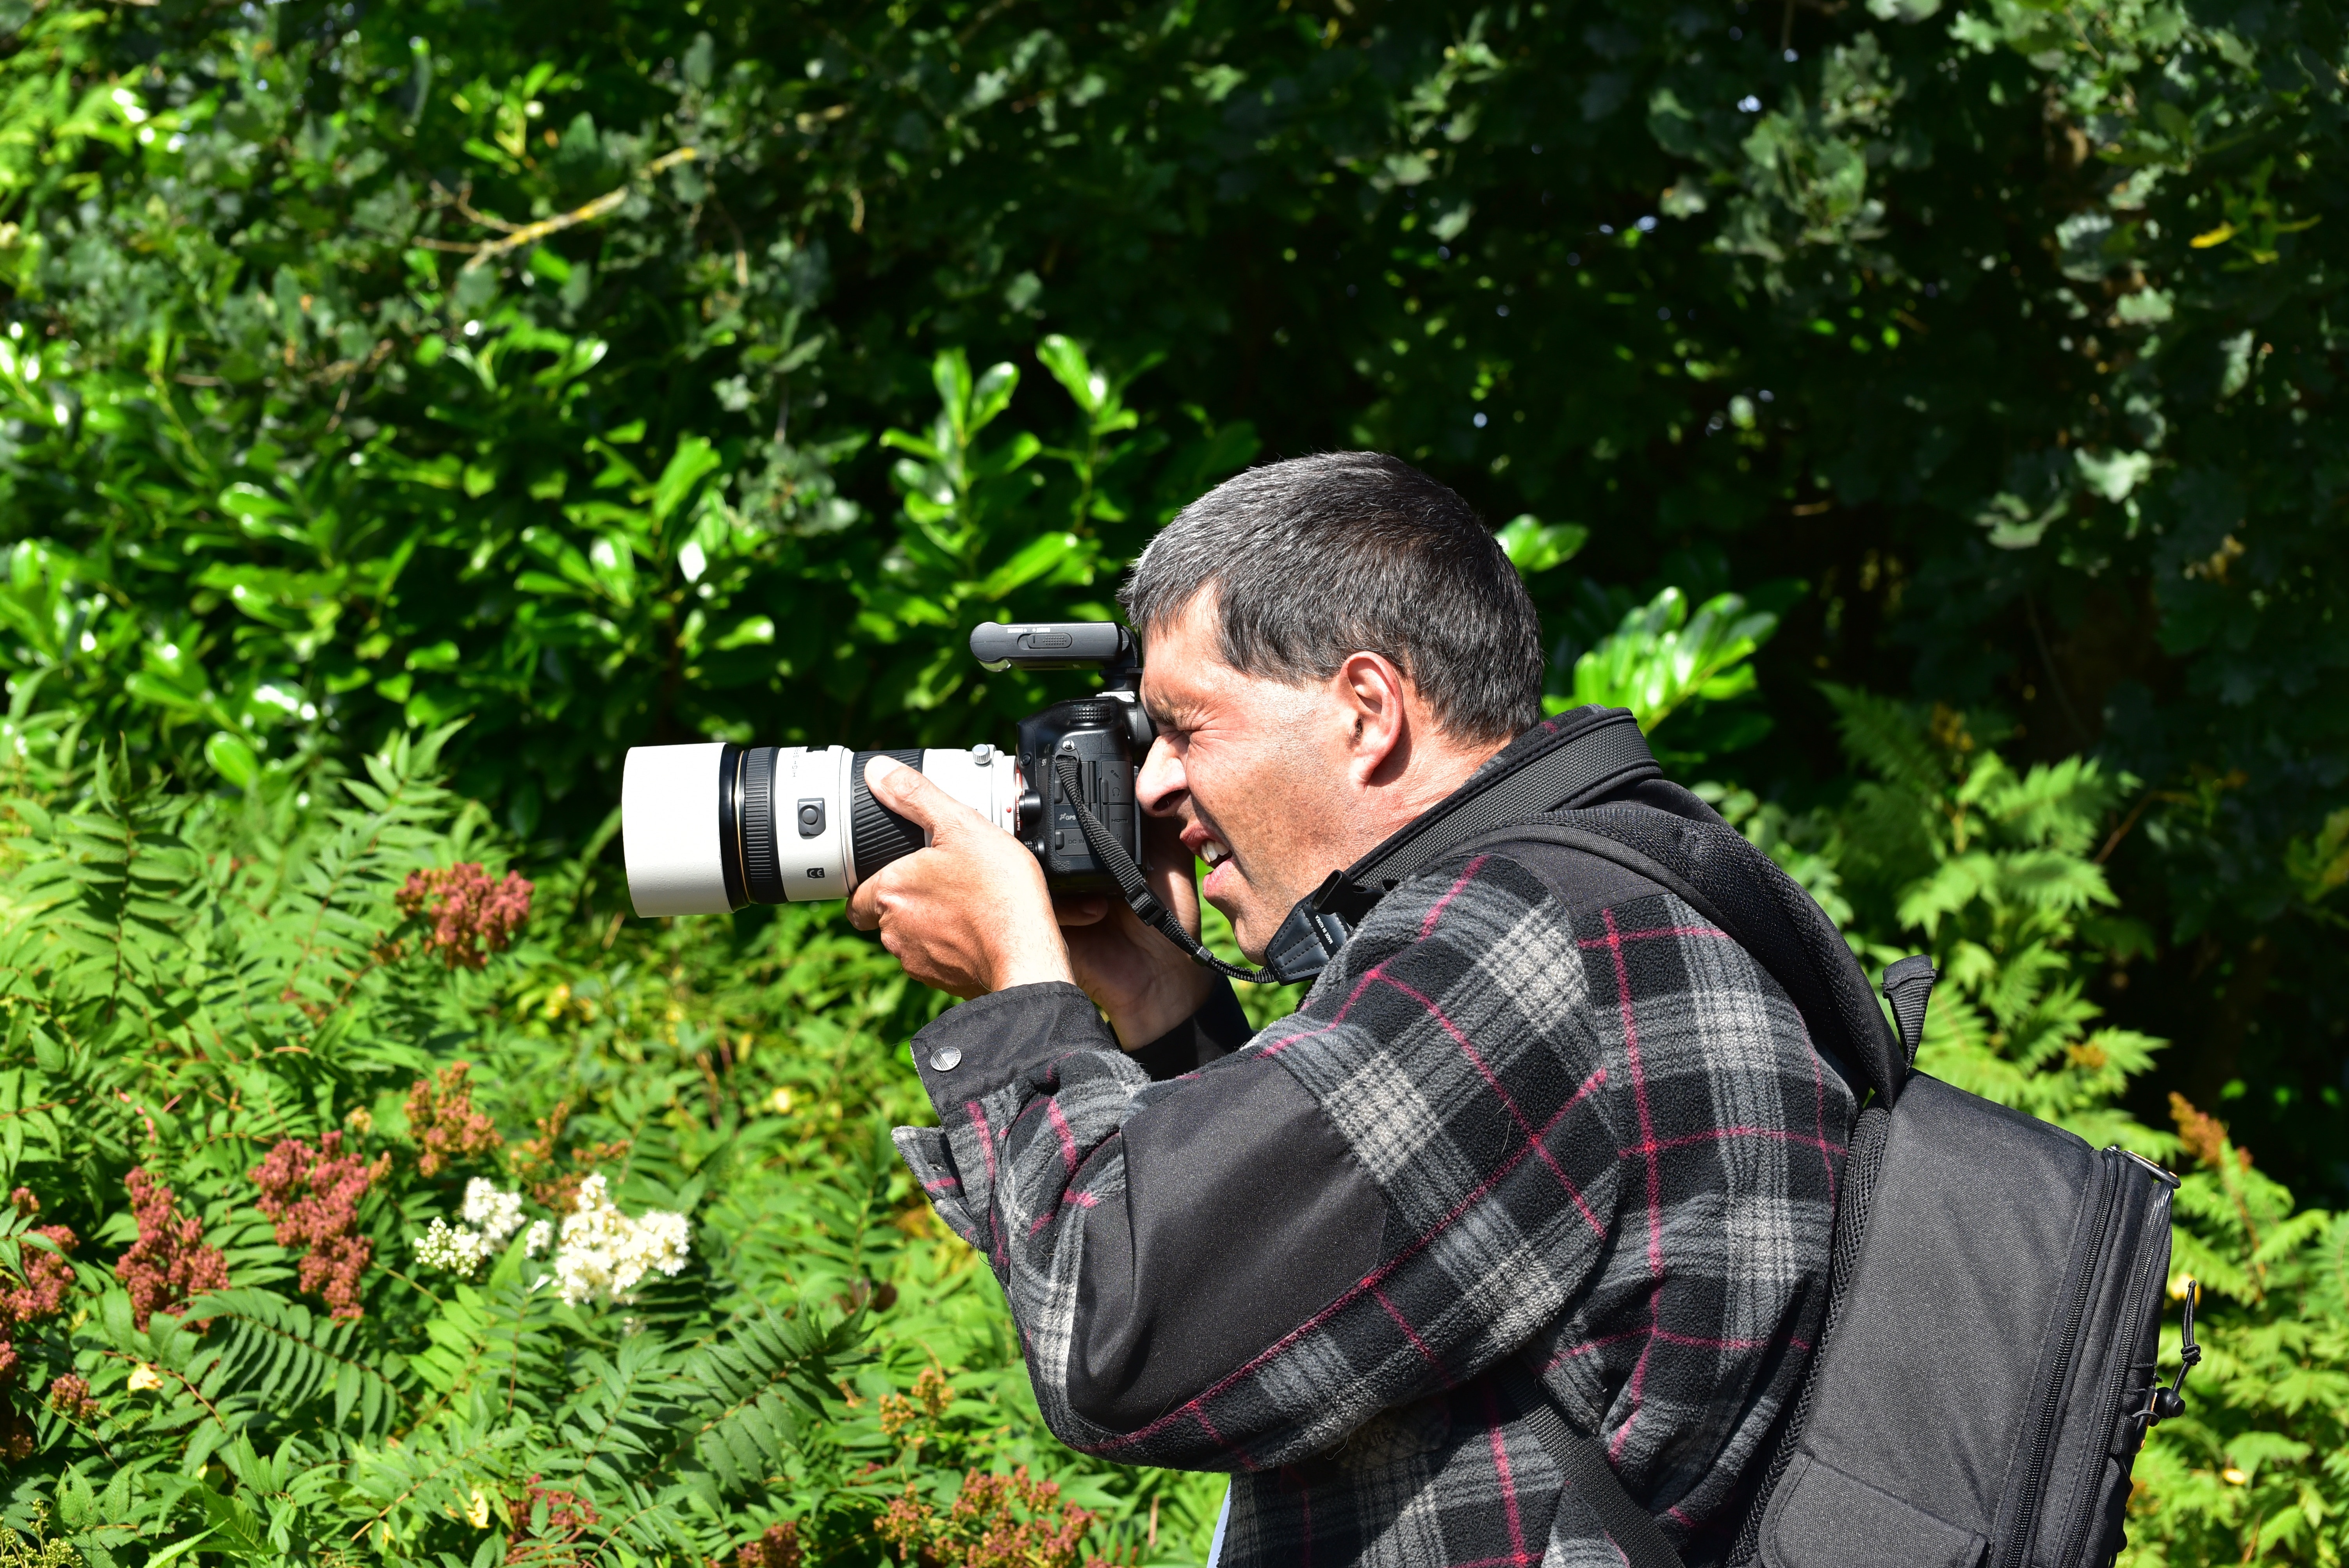 man in grey-and-pink plaid jacket with backpack holding white-and-black DSLR camera on hand overlooking plants during daytime